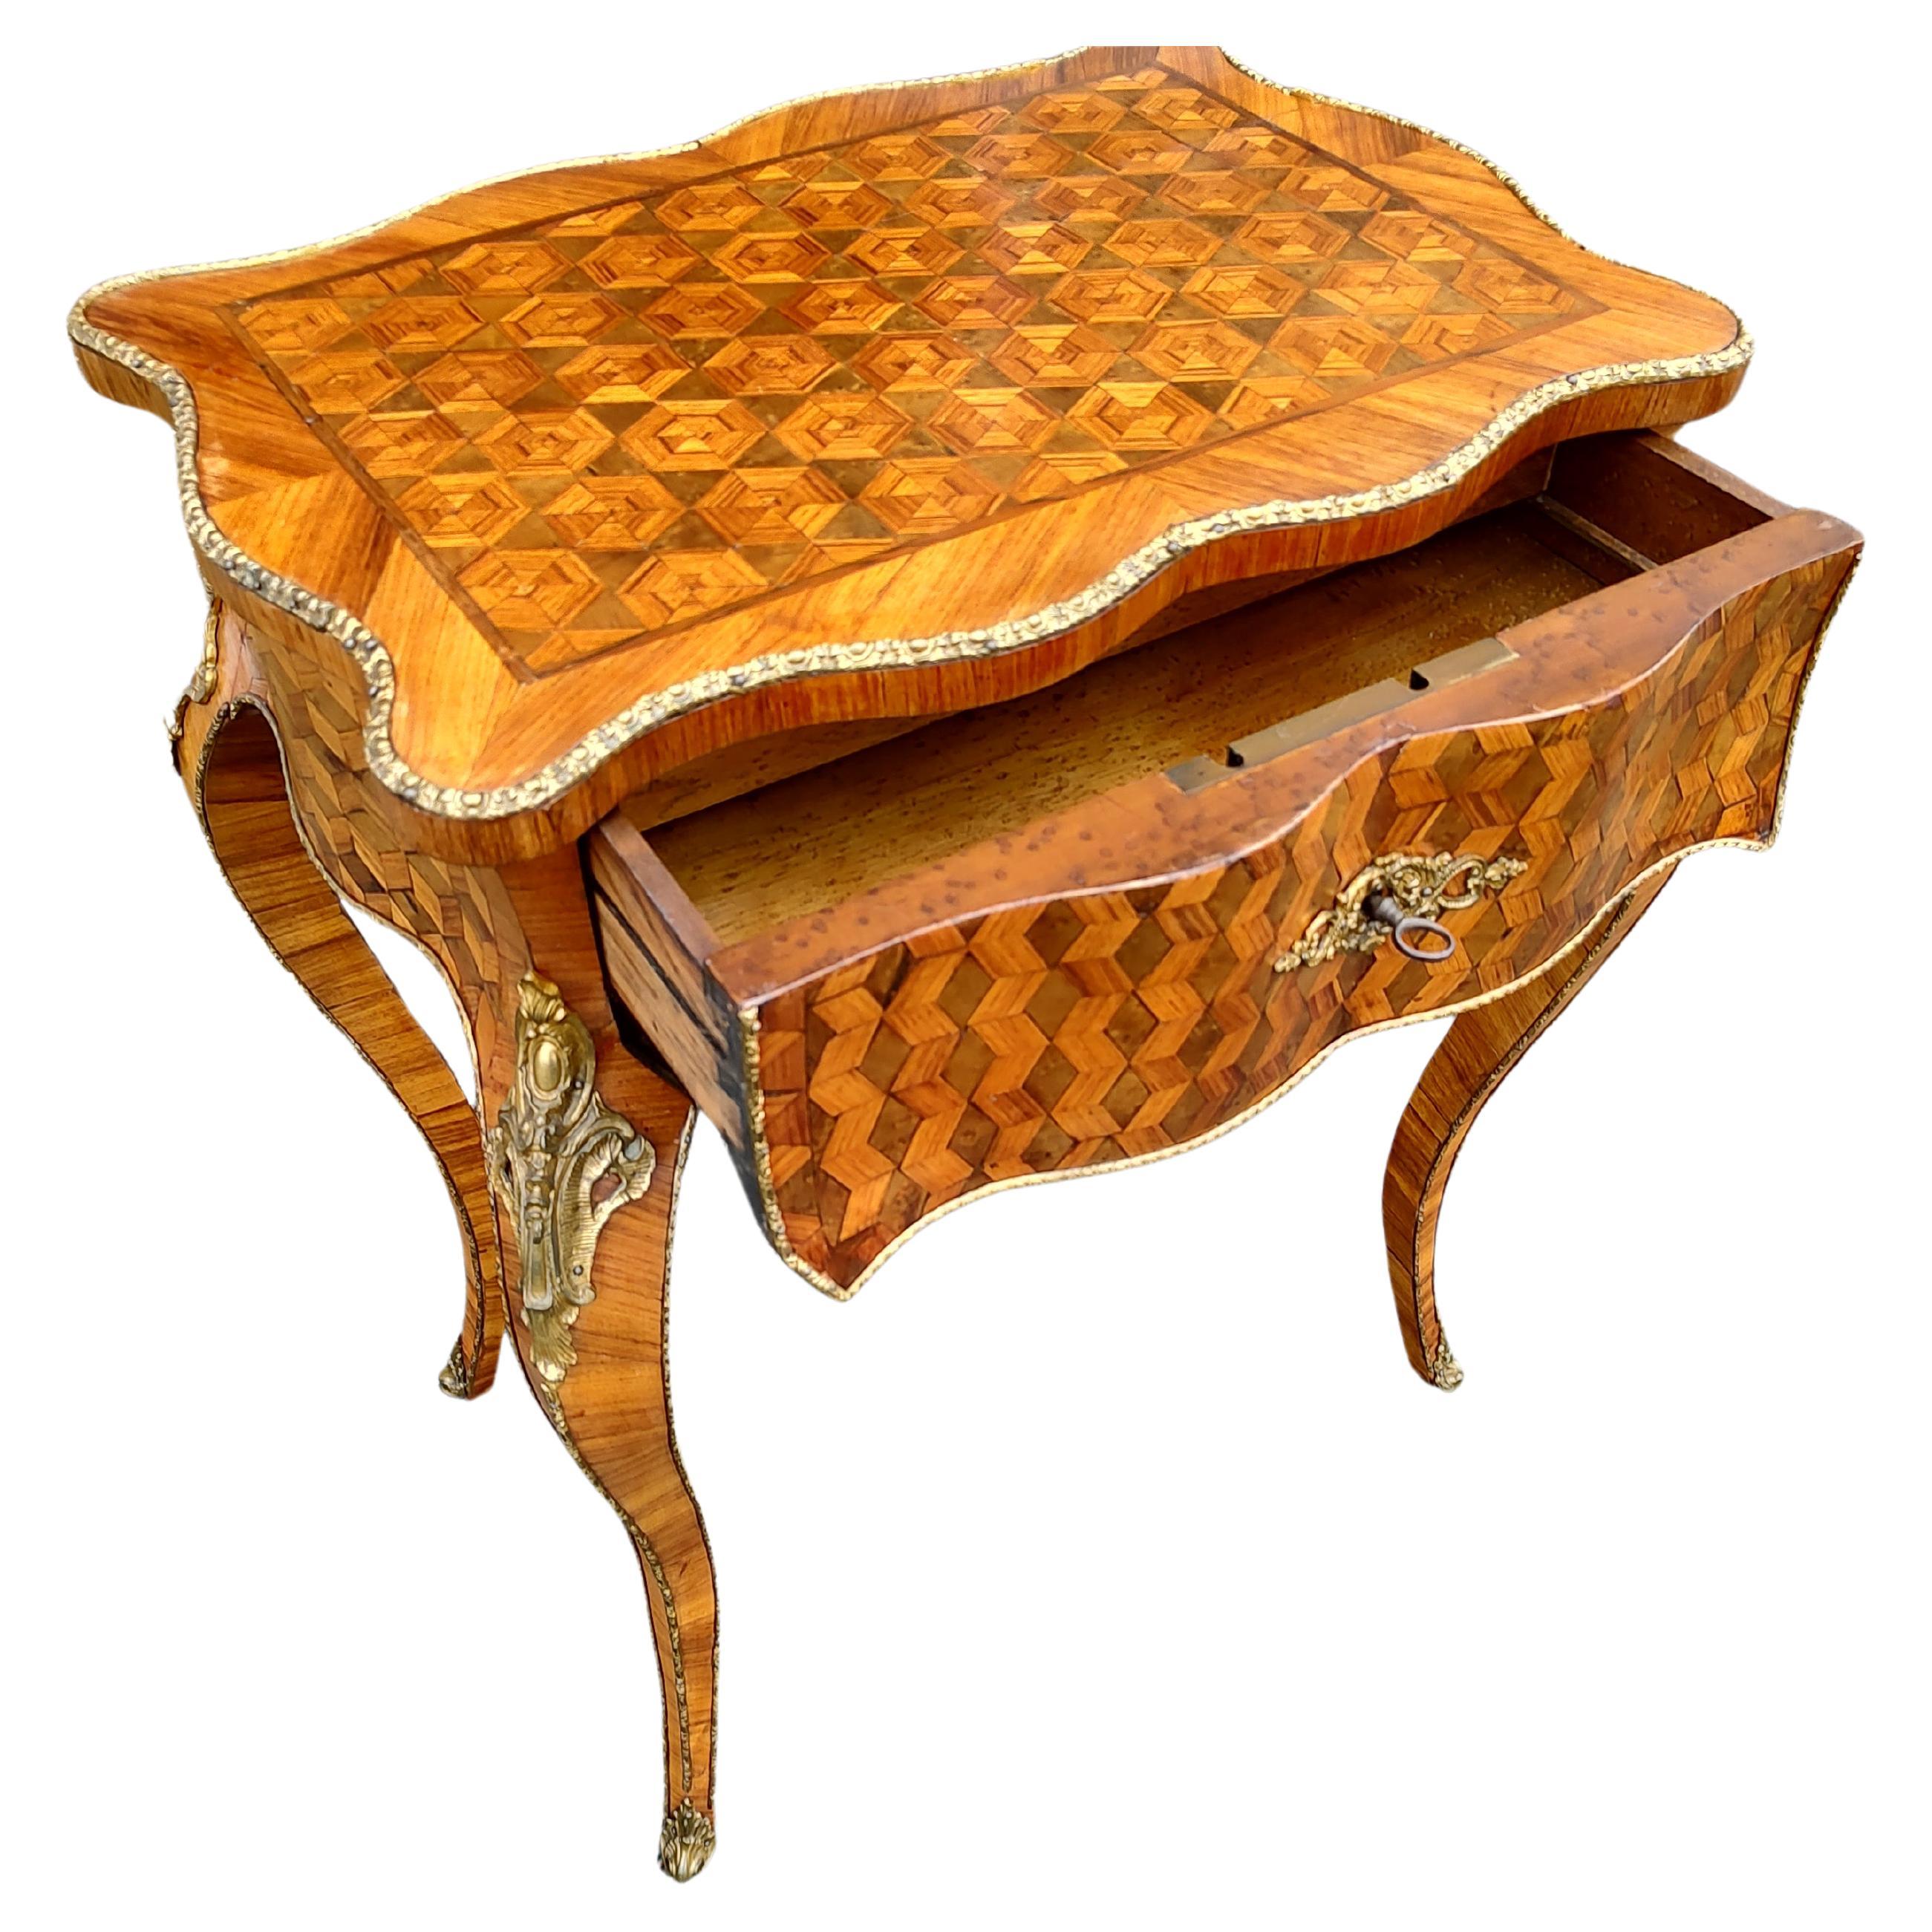 Fabulous French vanity with a flip lid top which opens to reveal a divided tray atop a drawer. Great craftsmanship in the Marquetry with cross banding. Bronze castings crisp and sharp. Cabriole legs support the cabinet. All in excellent vintage